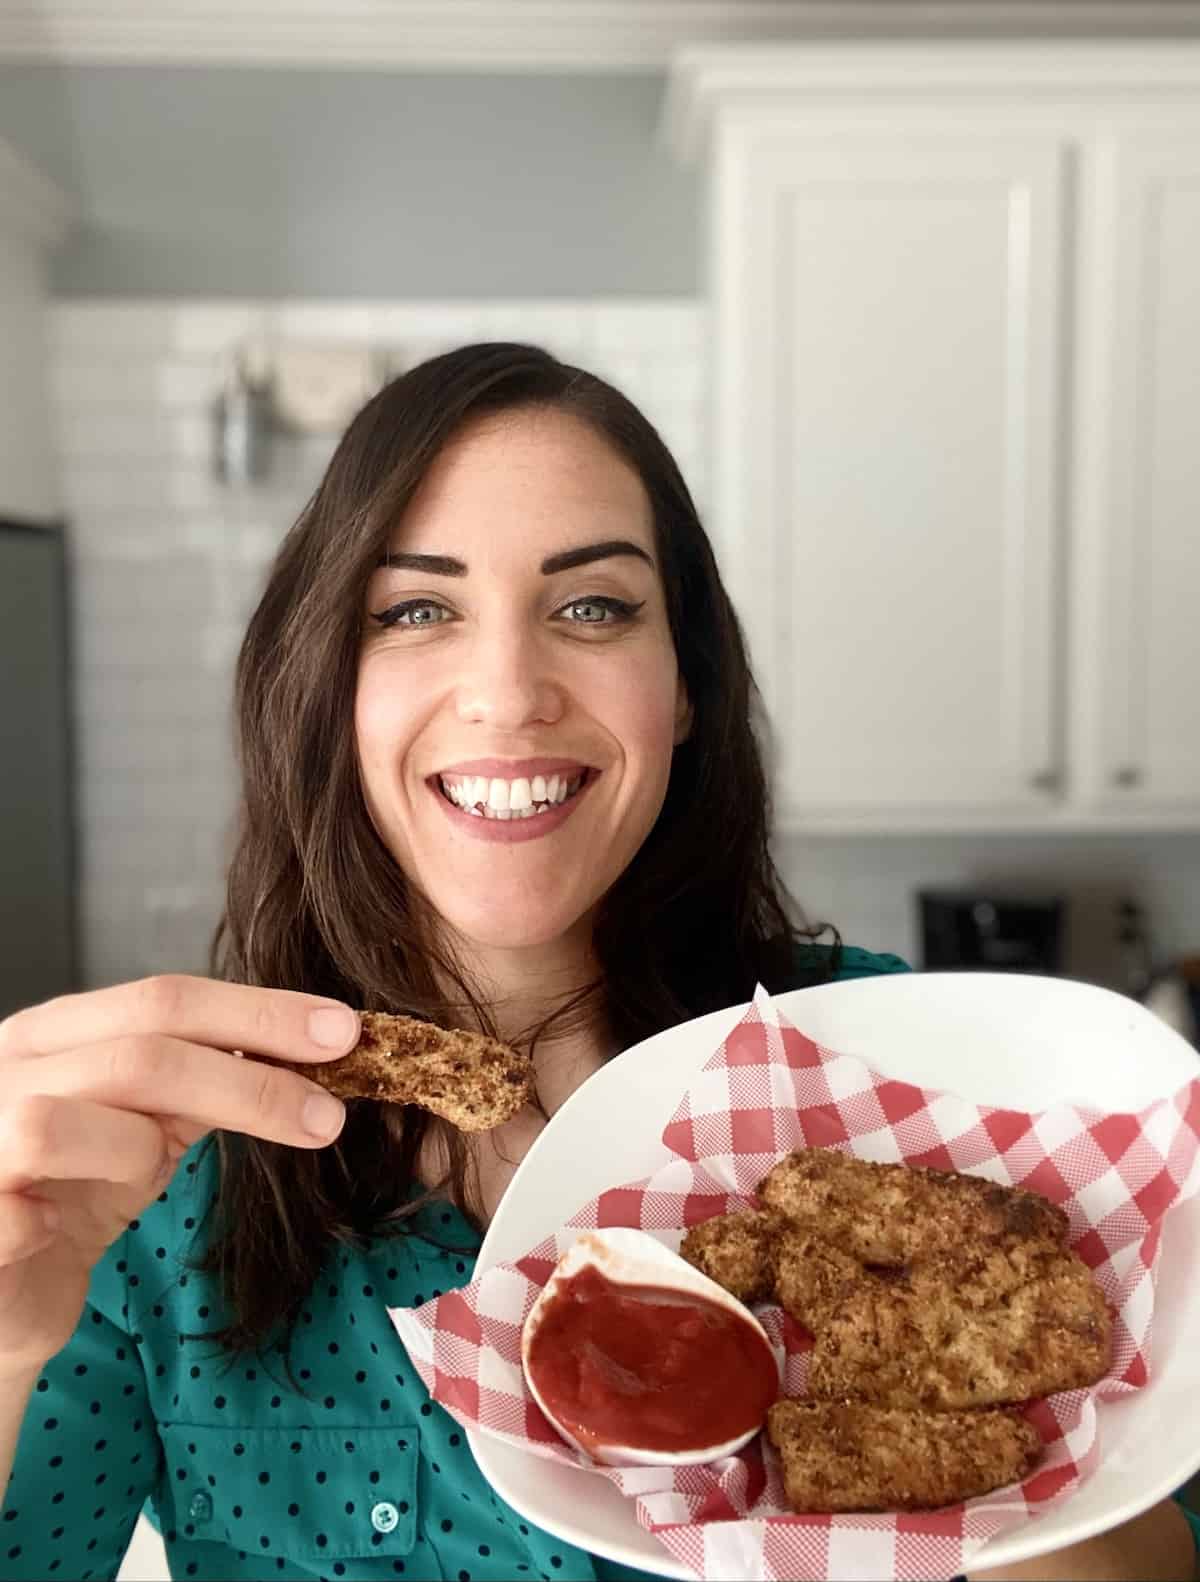 Smiling woman holding plate of chicken tenders and holding one tender with the other hand